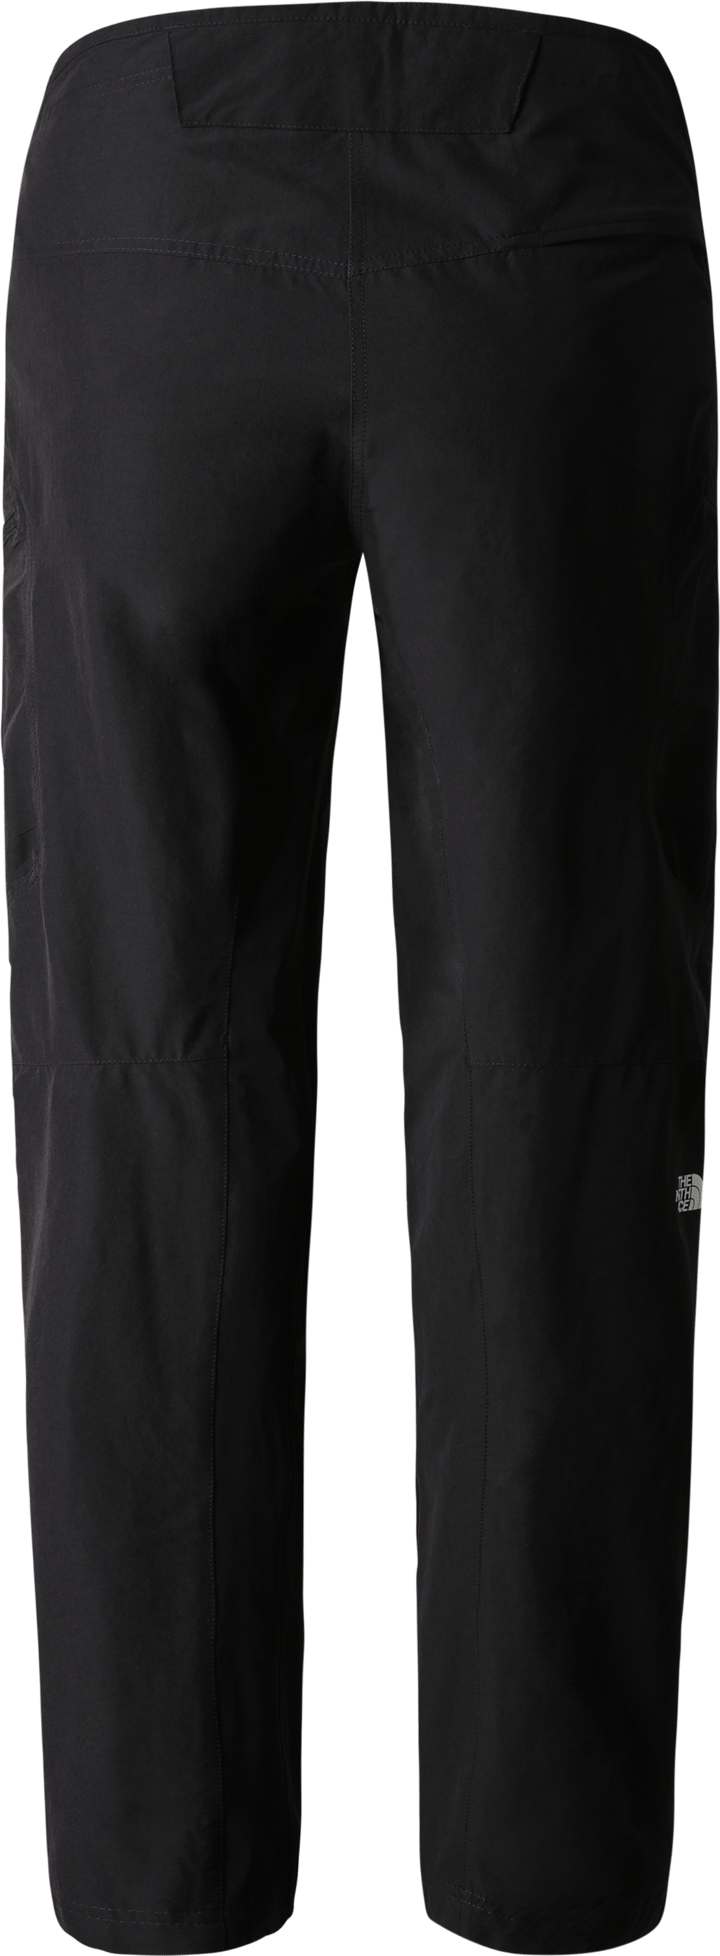 Men's Exploration Tapered Pant TNF BLACK The North Face